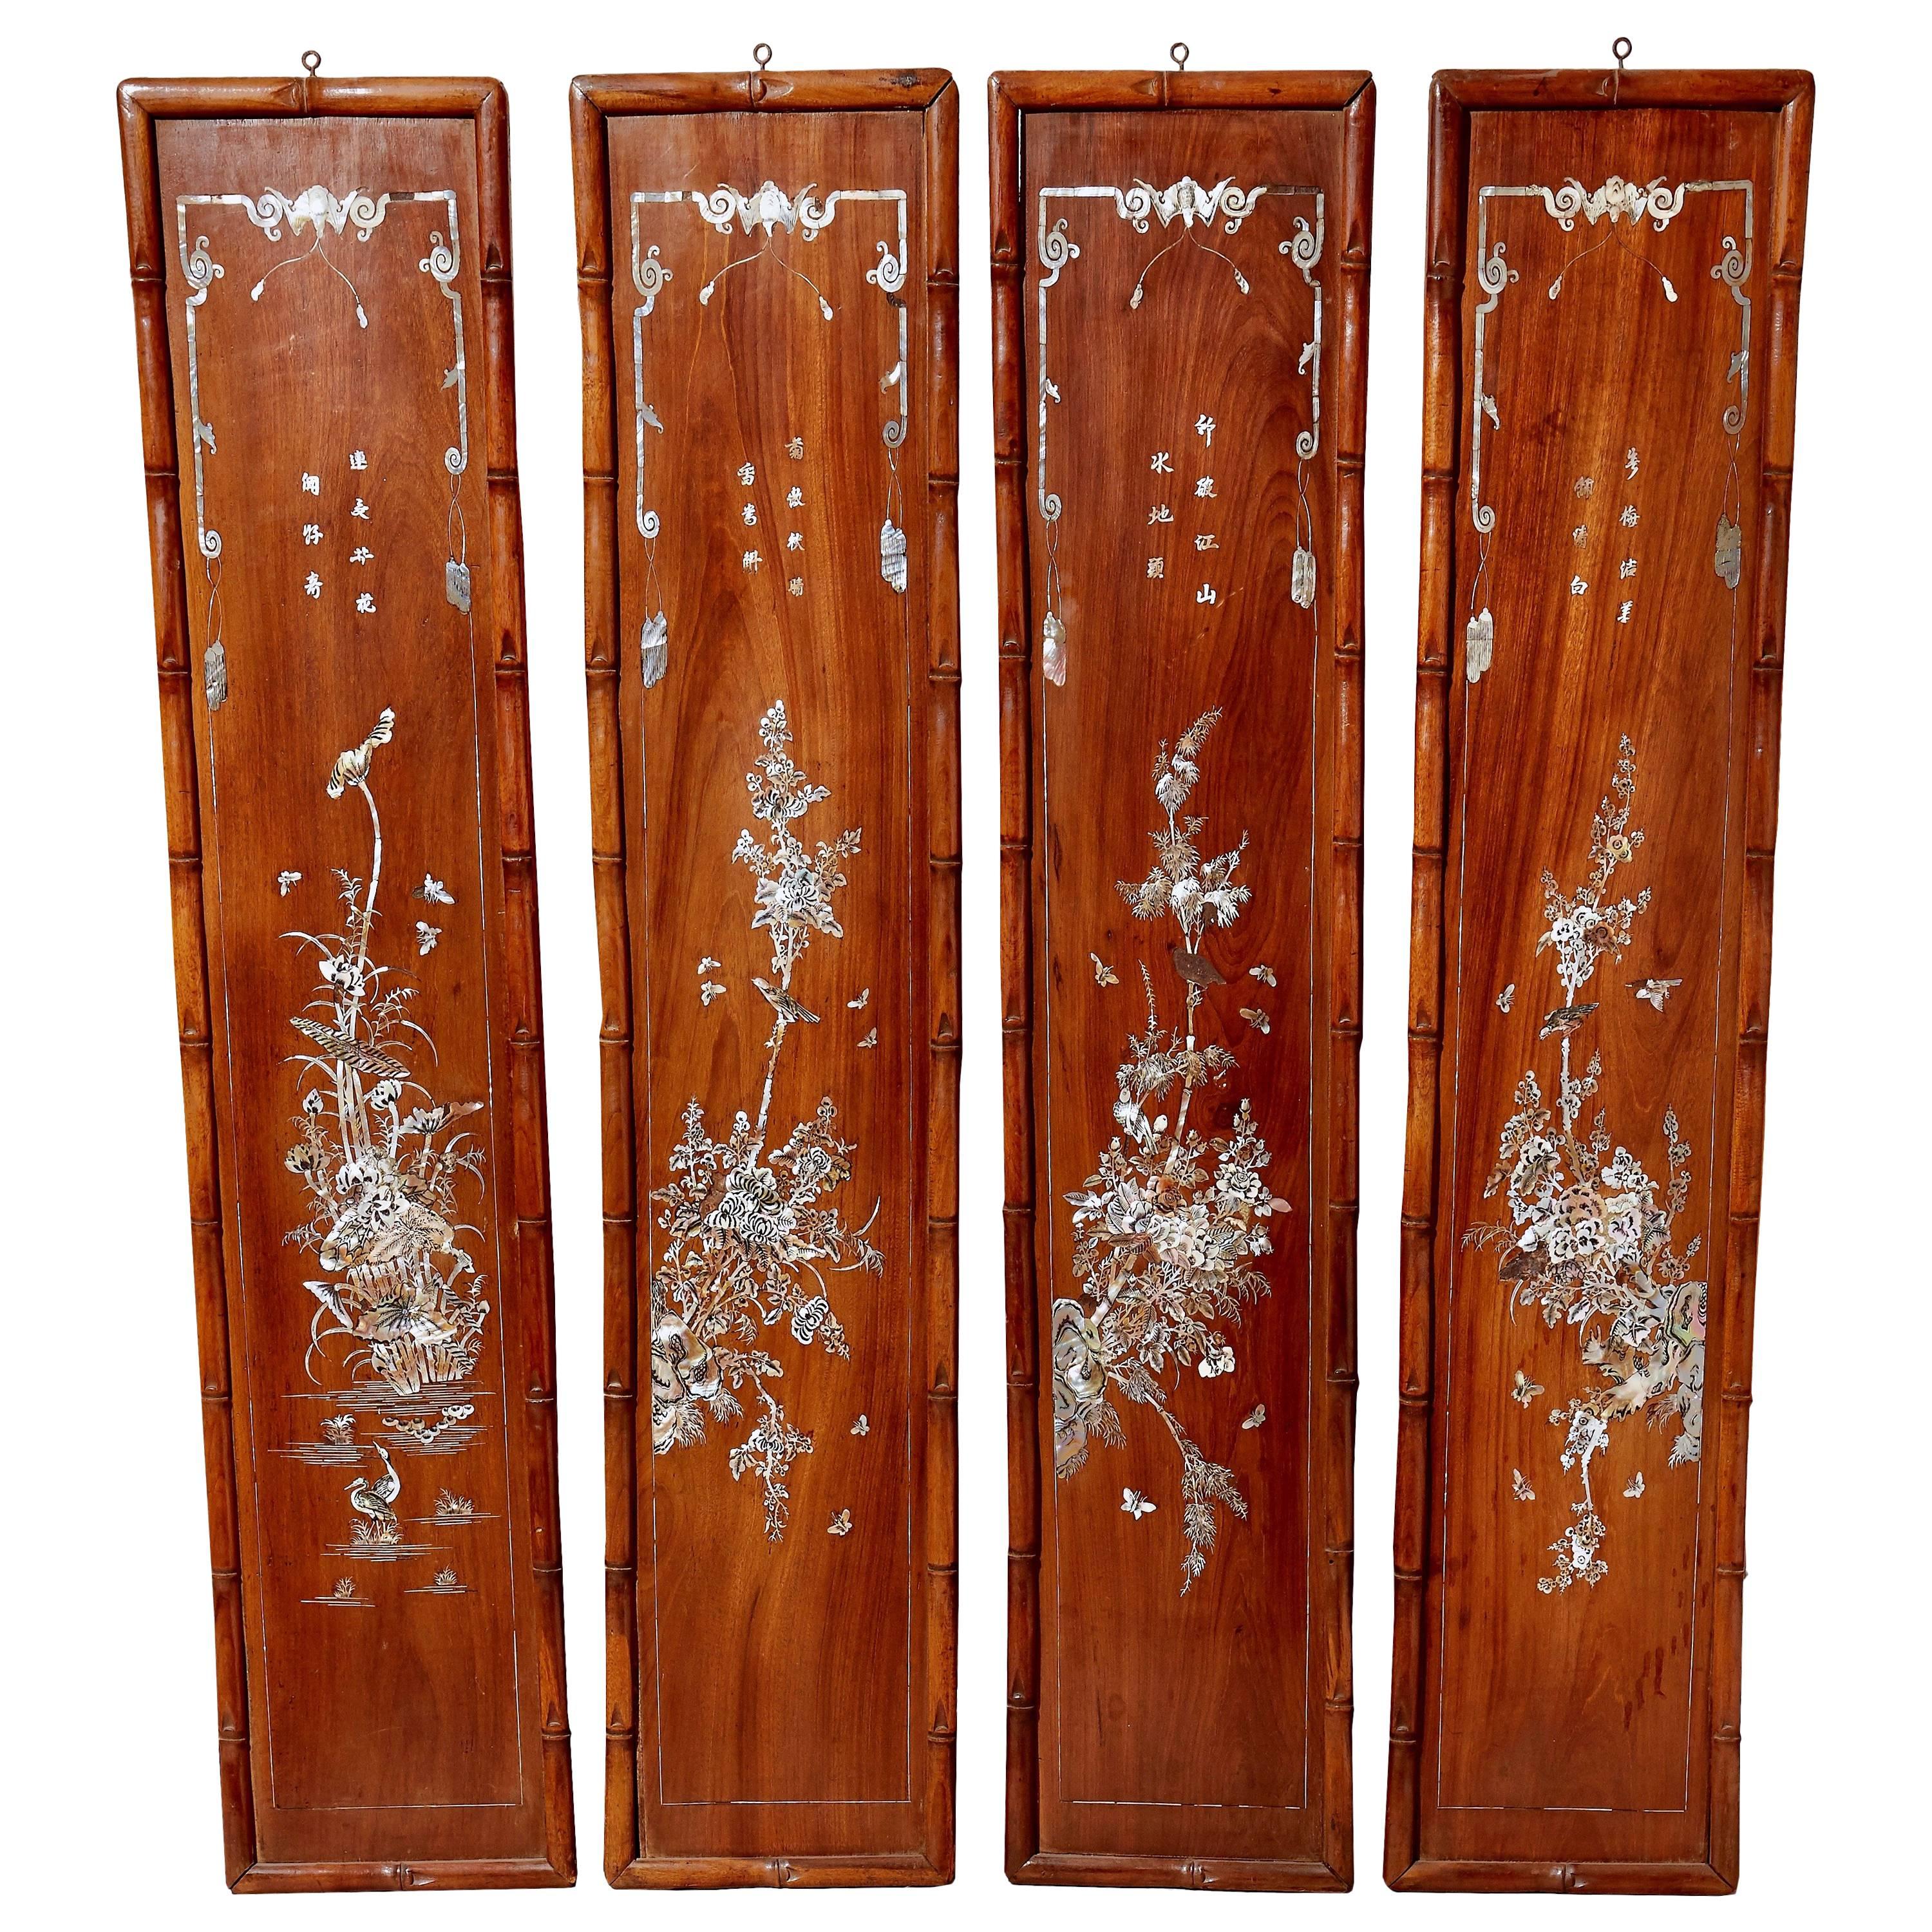 Set of Four Carved Asian Wood Panels with Mother of Pearl Inlays